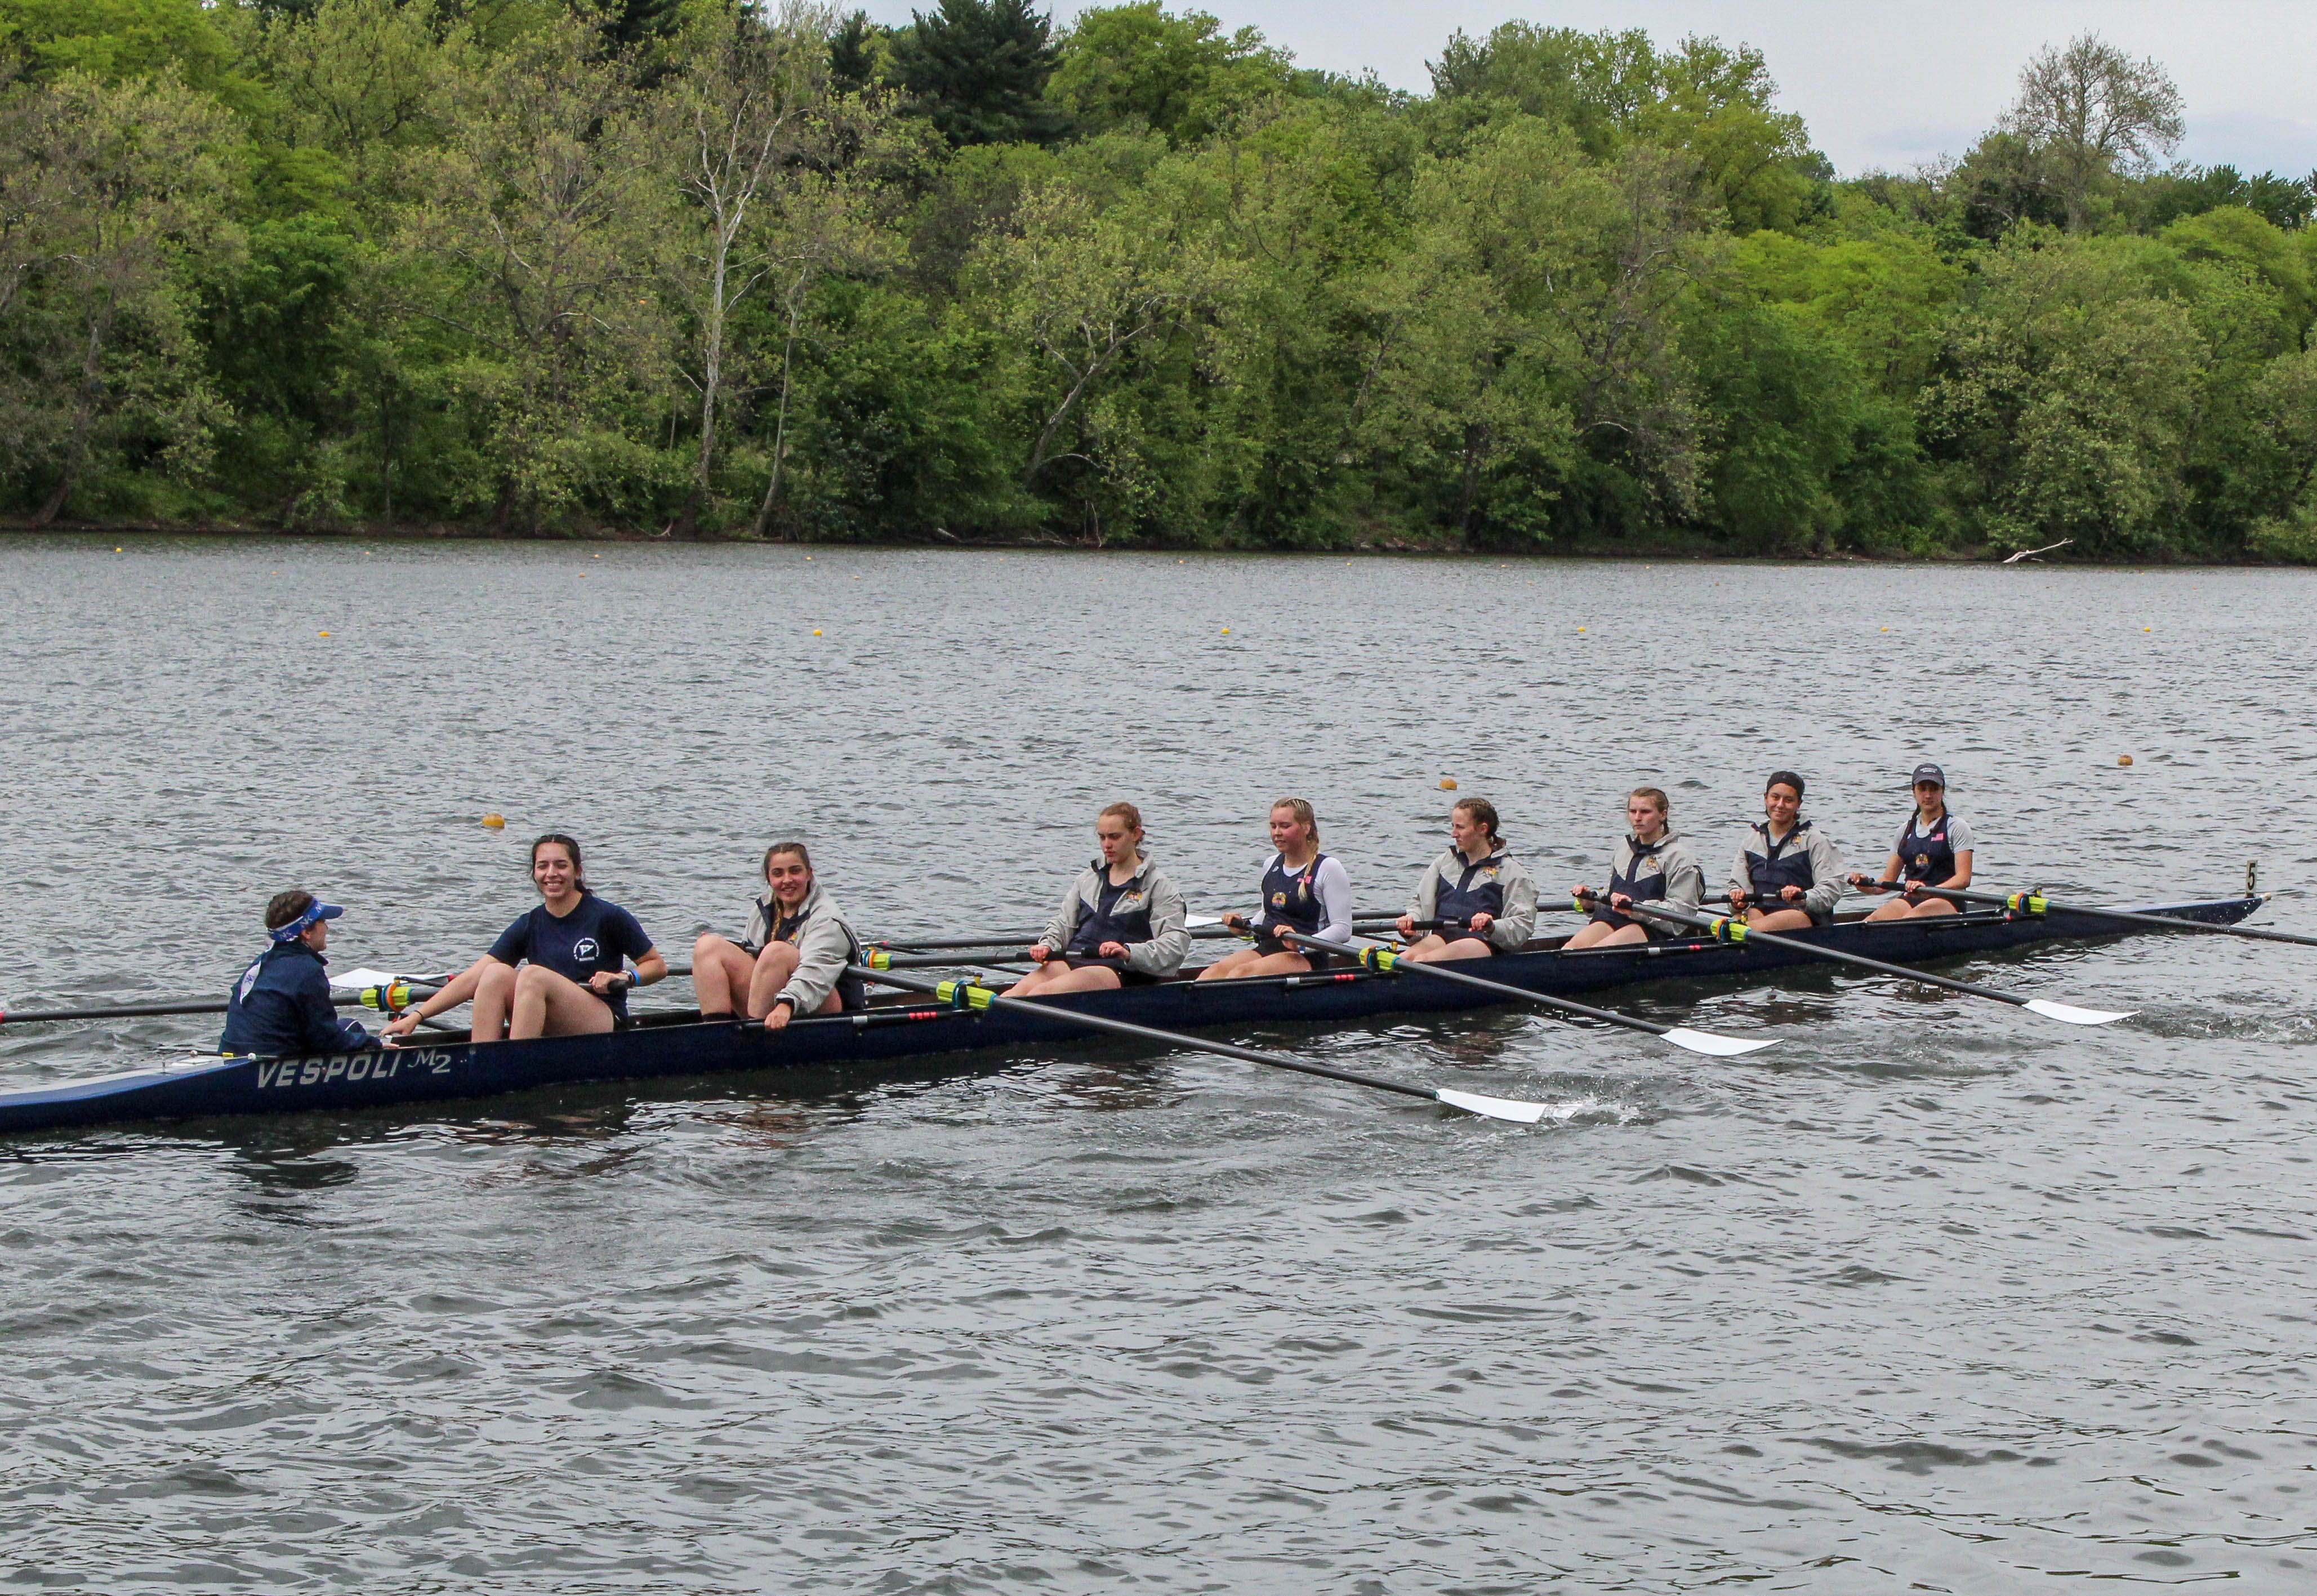 Women's Eight launching in preparation for their competition